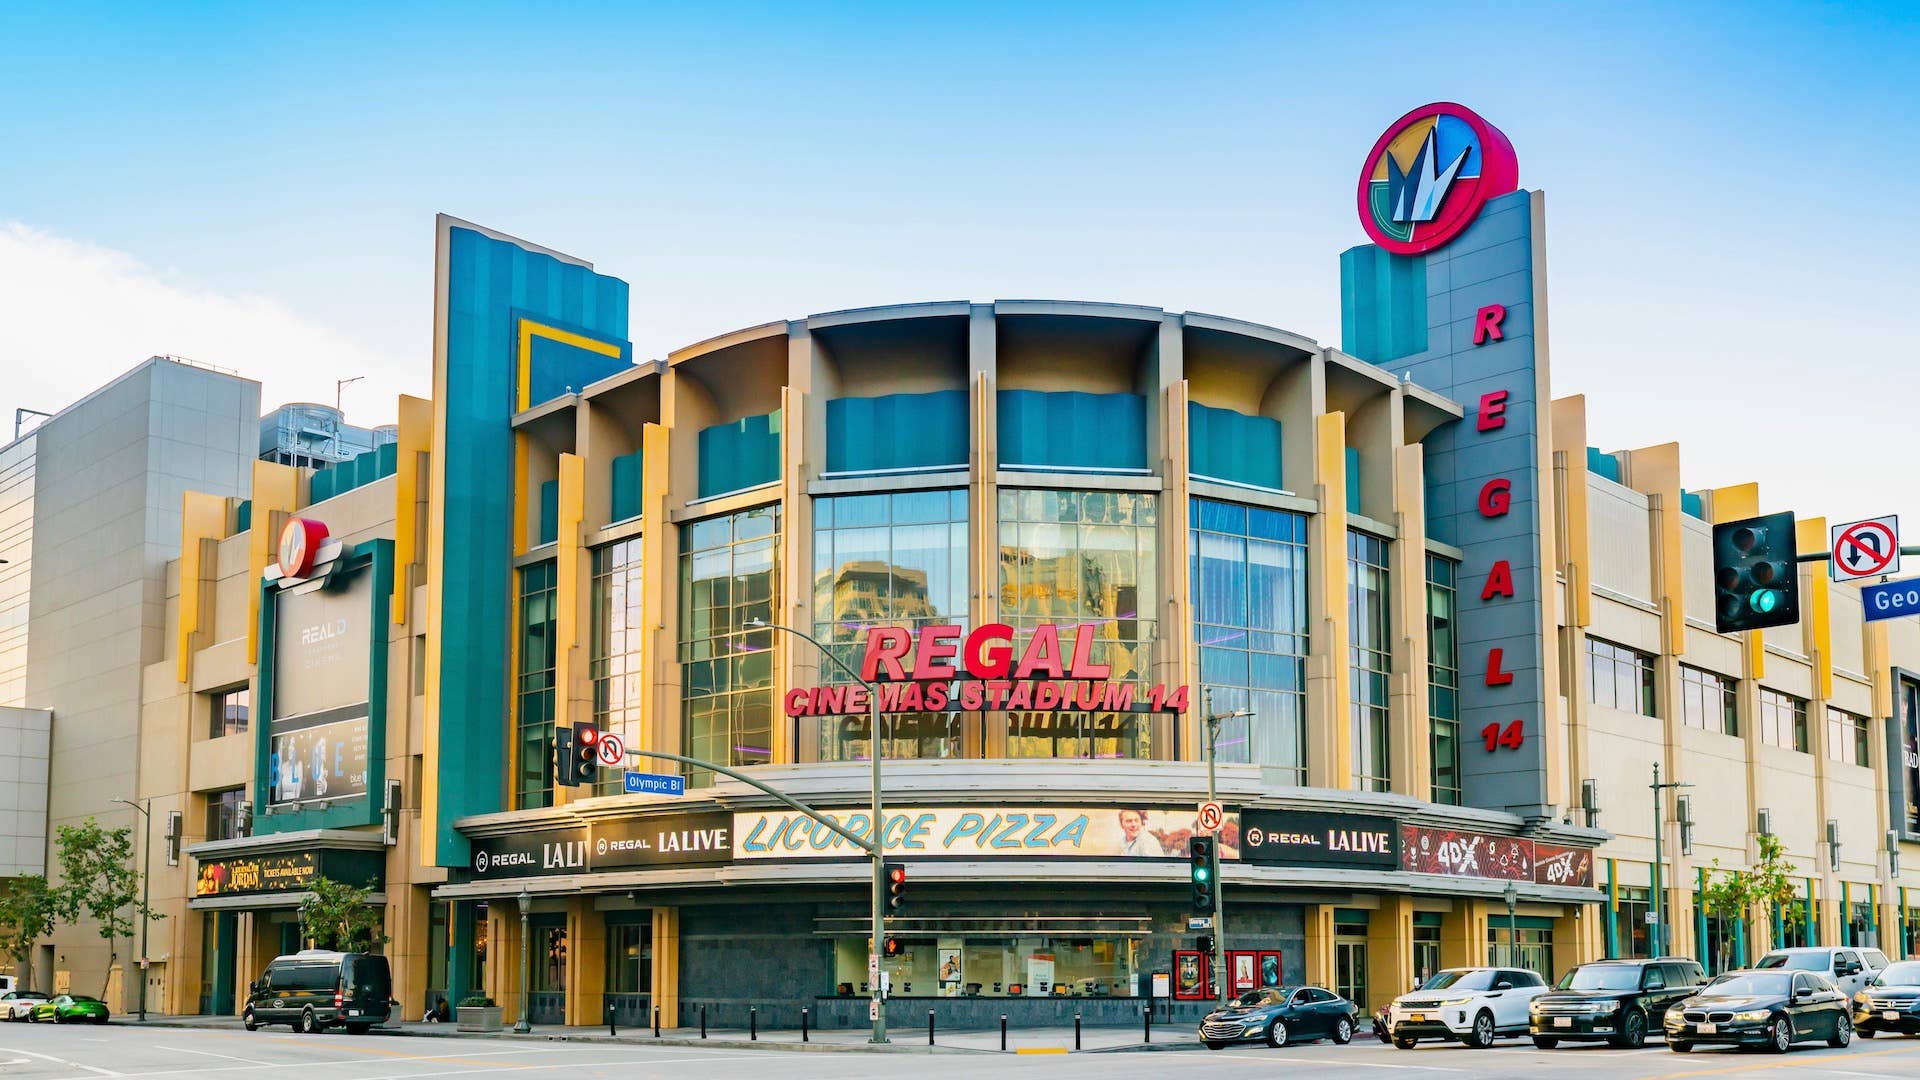 General view of Regal Cinemas' flagship L.A. movie theater